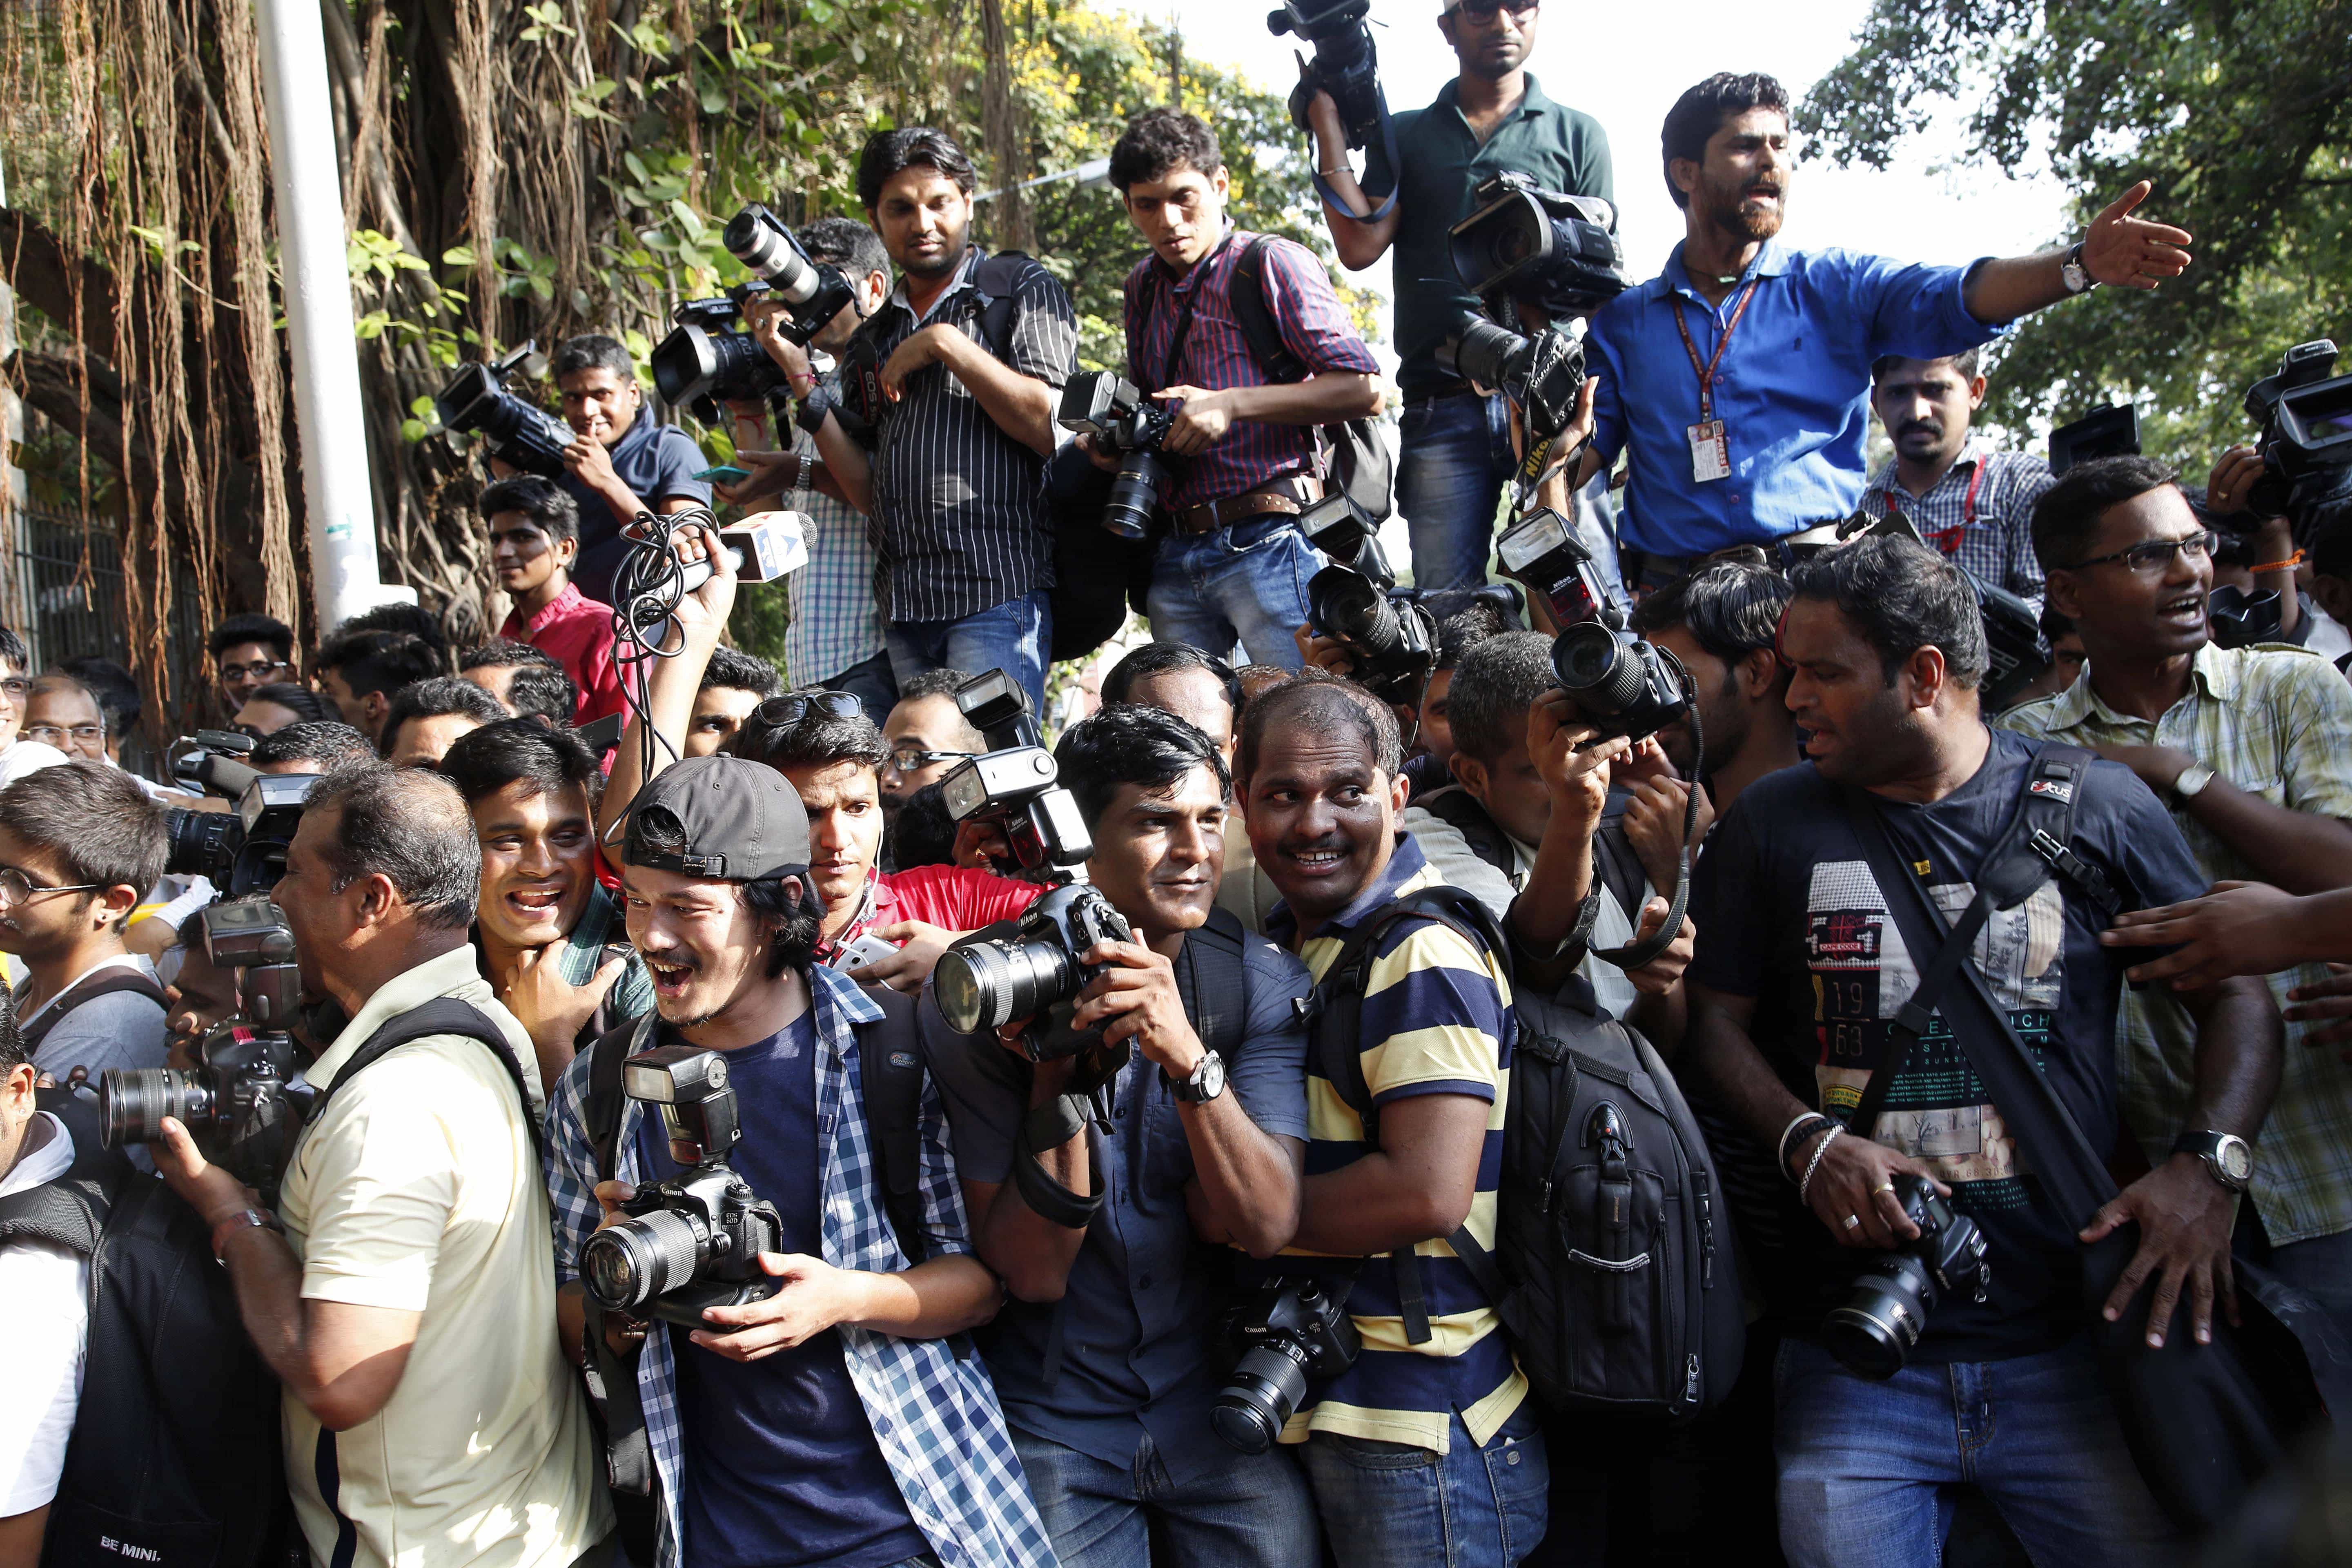 Members of the media jostle for space outside the Mumbai Sessions court during a Bollywood actor's trial, 6 May 2015, AP Photo/Rajanish Kakade